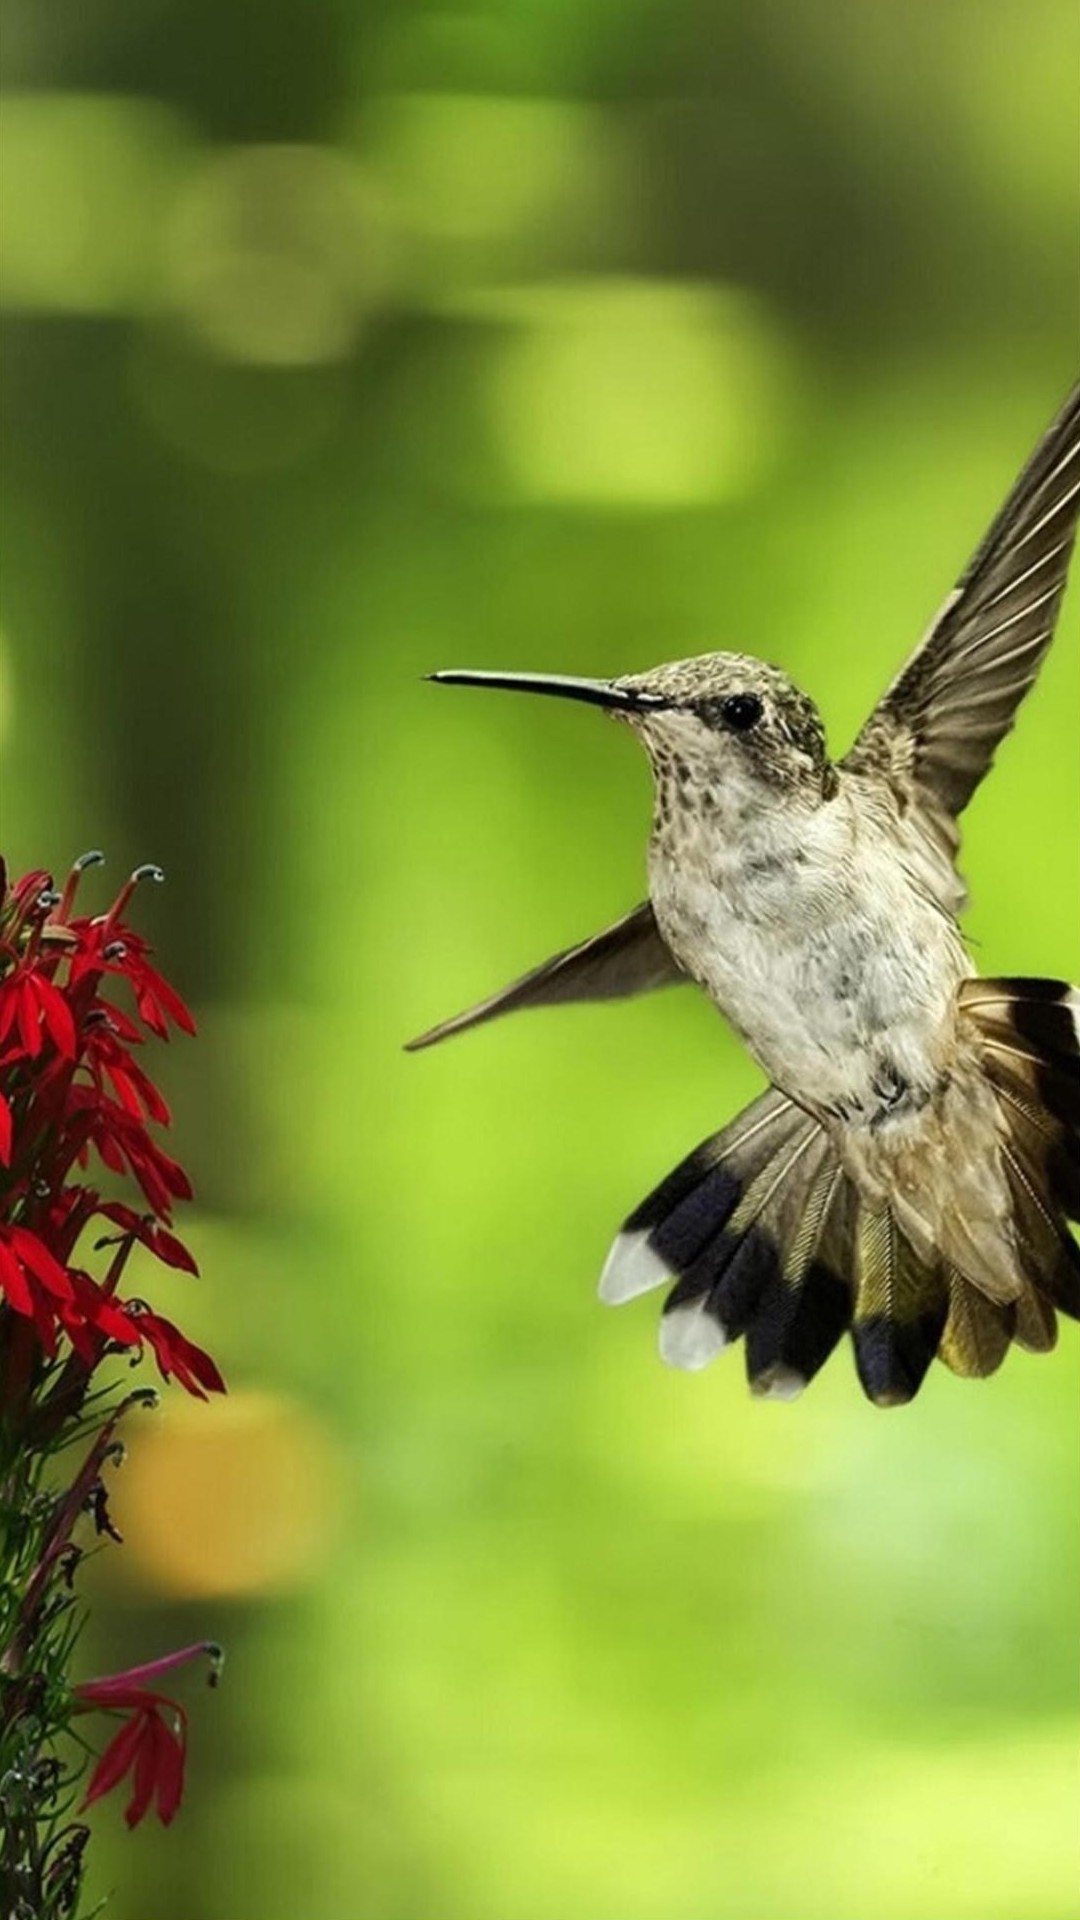 Htc One Max Animal Hummingbird Android Wallpaper